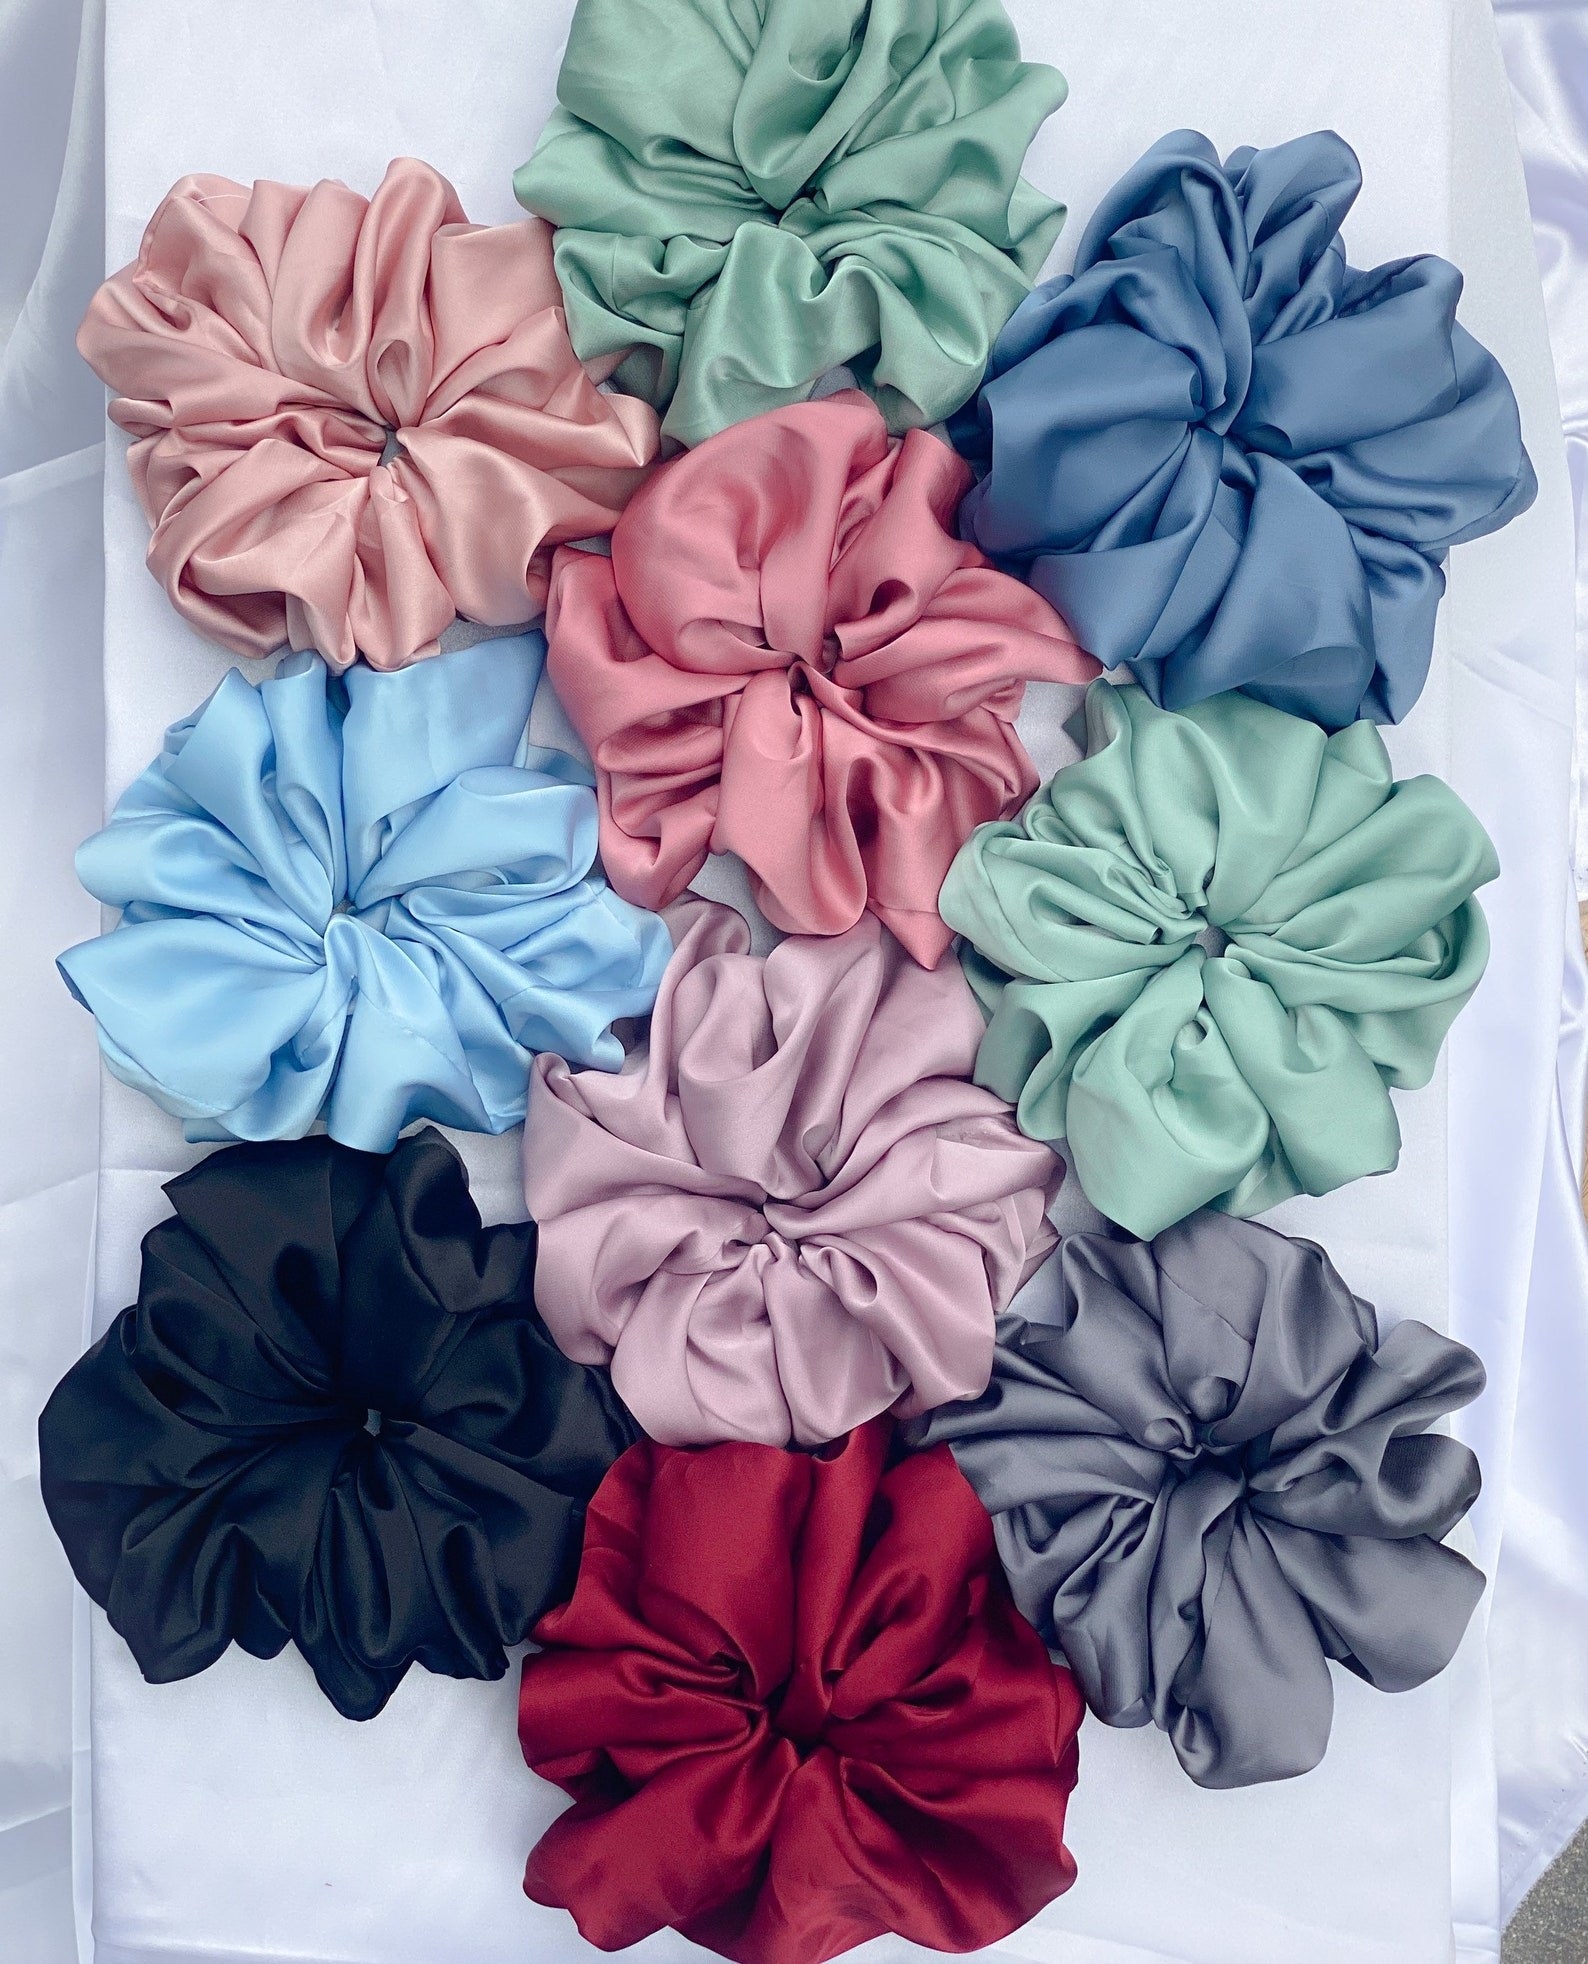 scrunchies of various colors